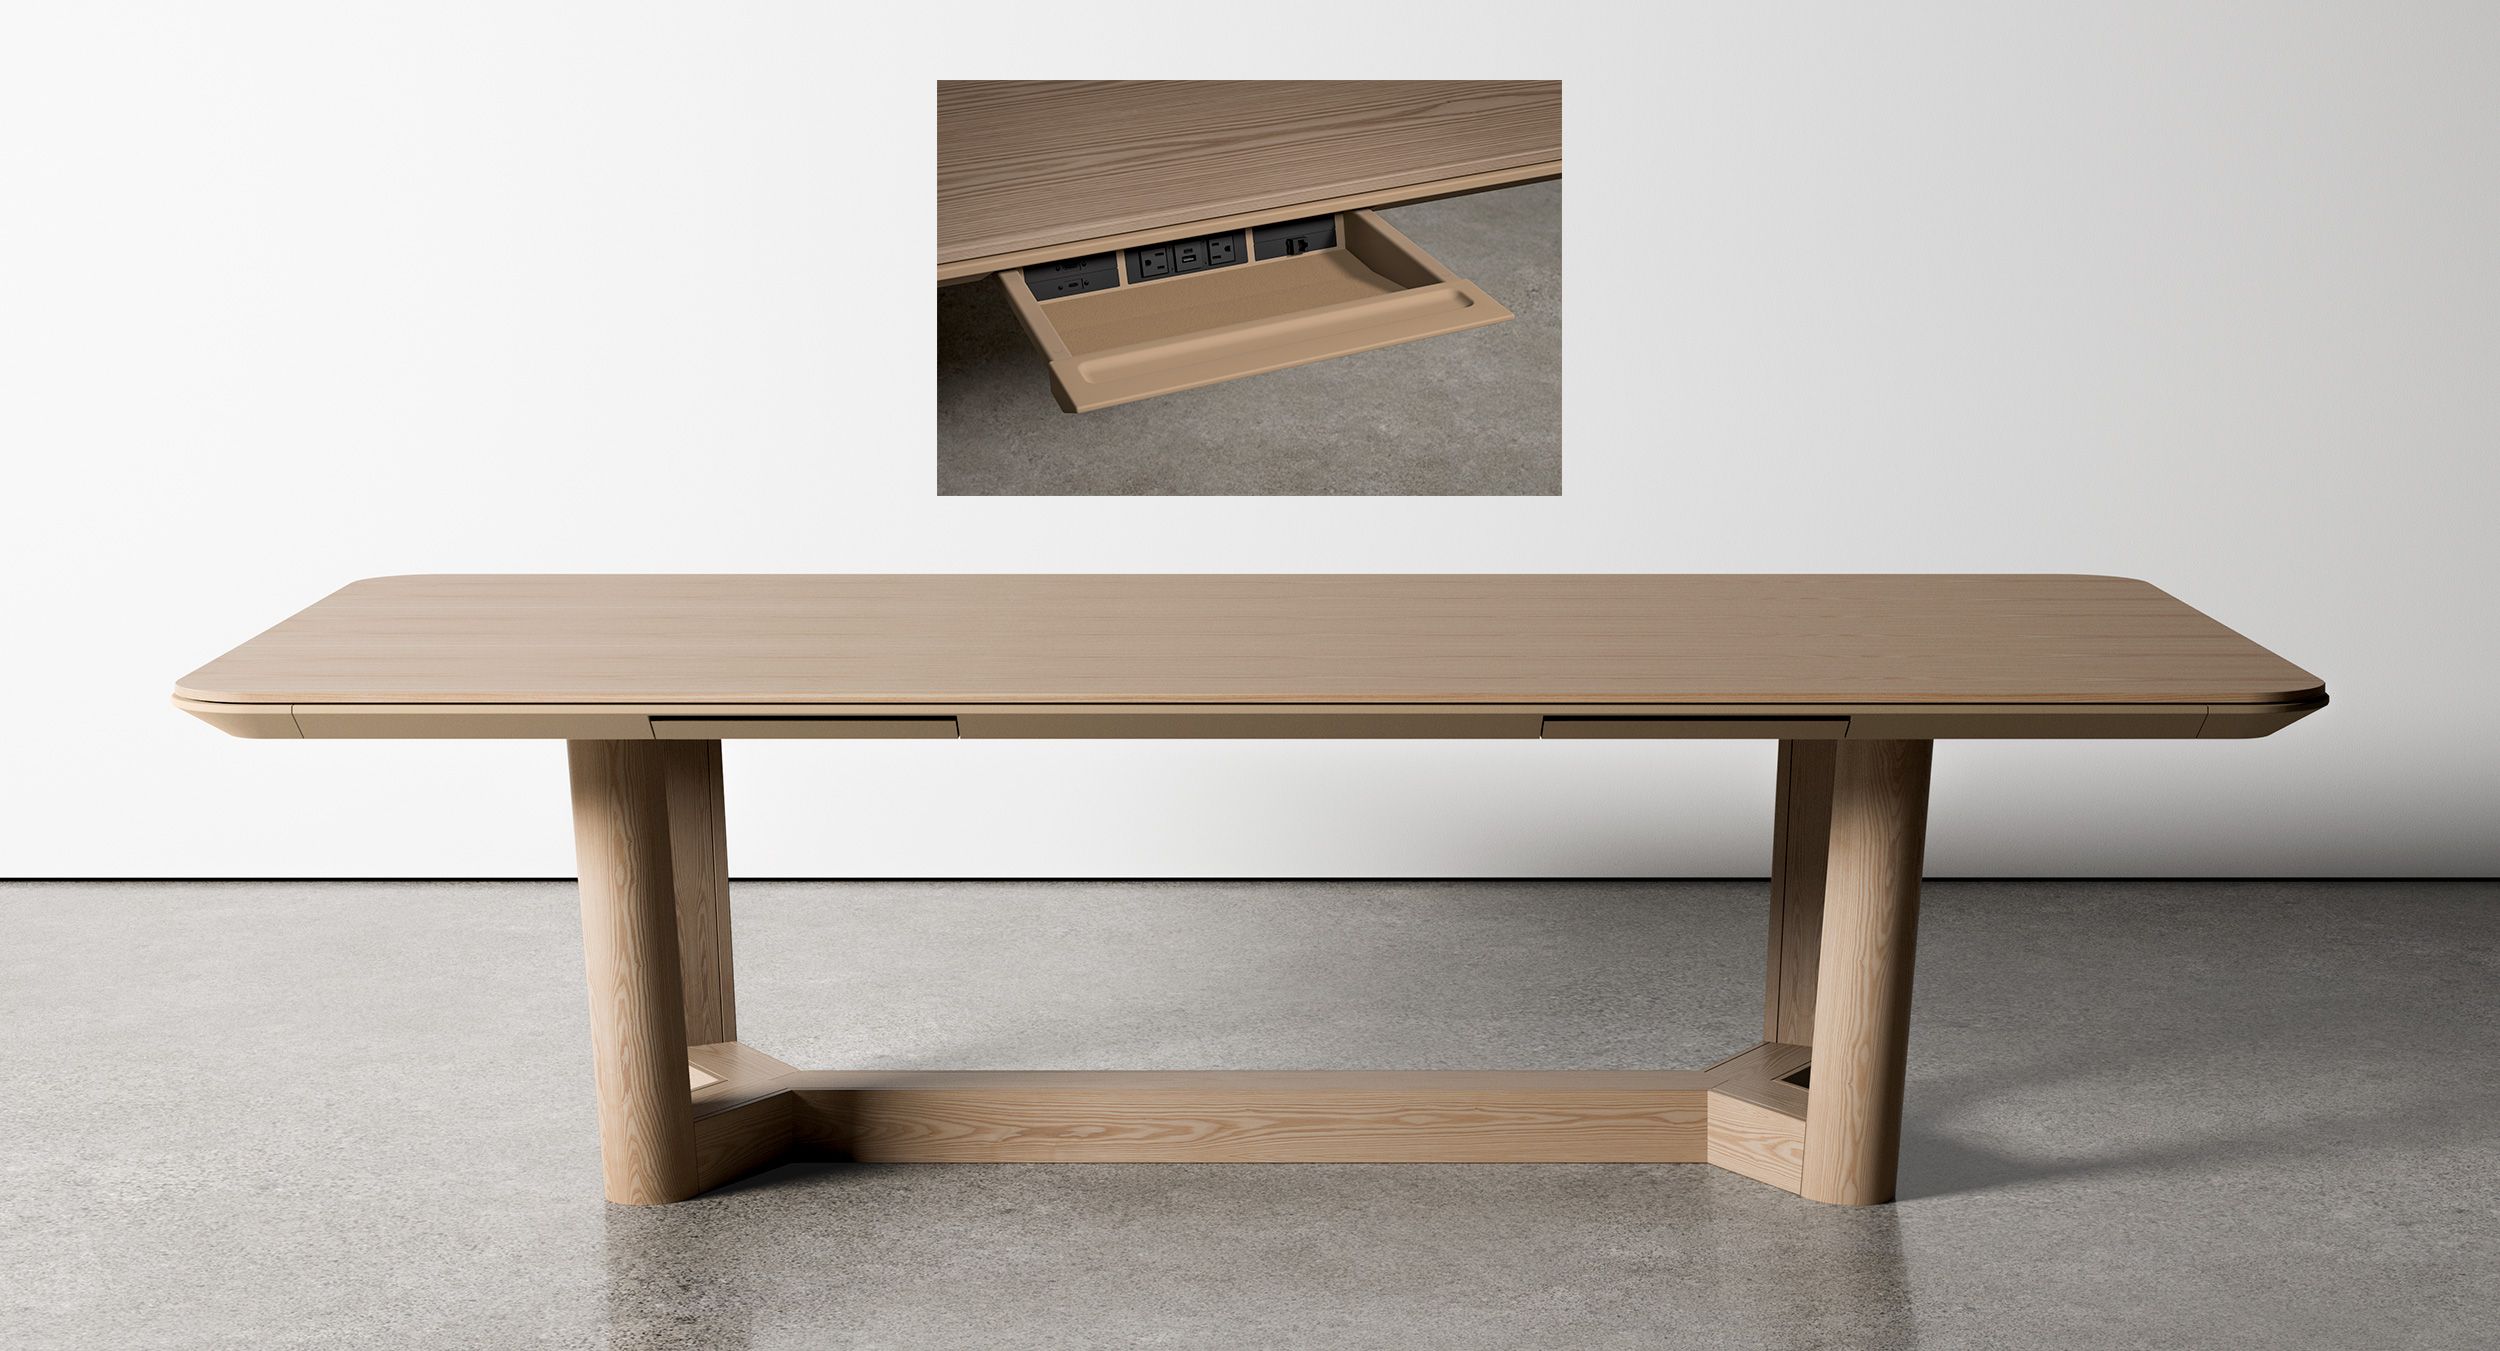 Halo DS features gorgeous wood table bases in any veneer species and finish with concealed wire pathways to invisibly integrate technology needs.